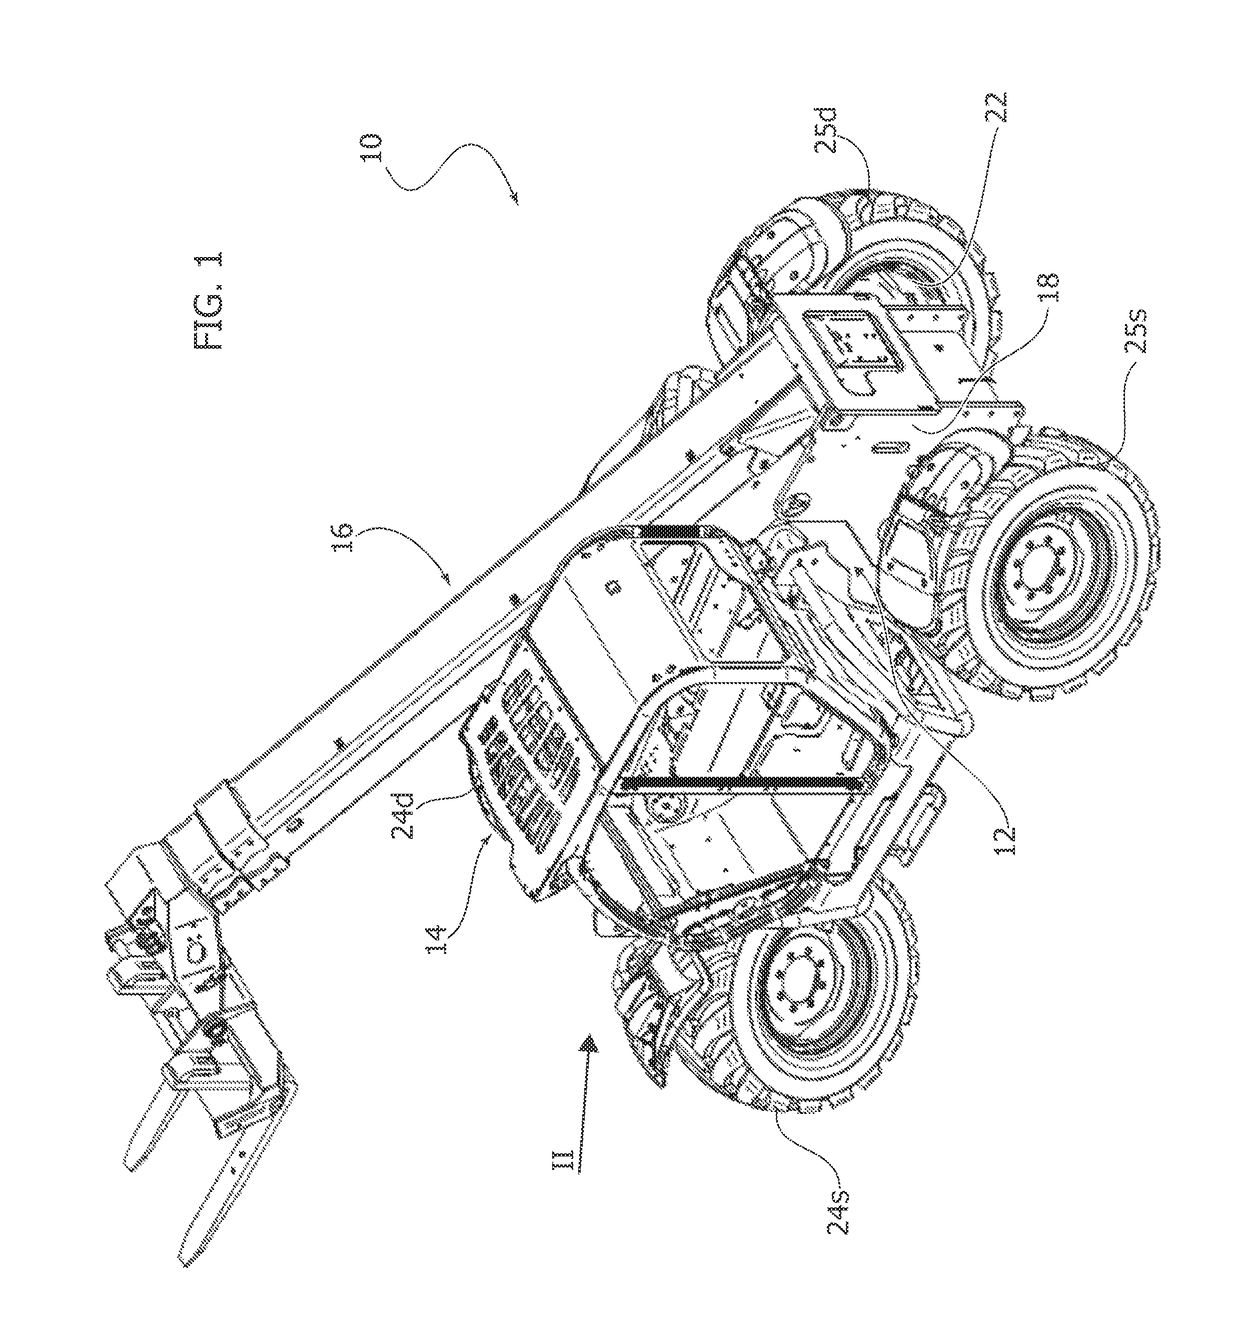 Lifting vehicle with a transverse stability control system